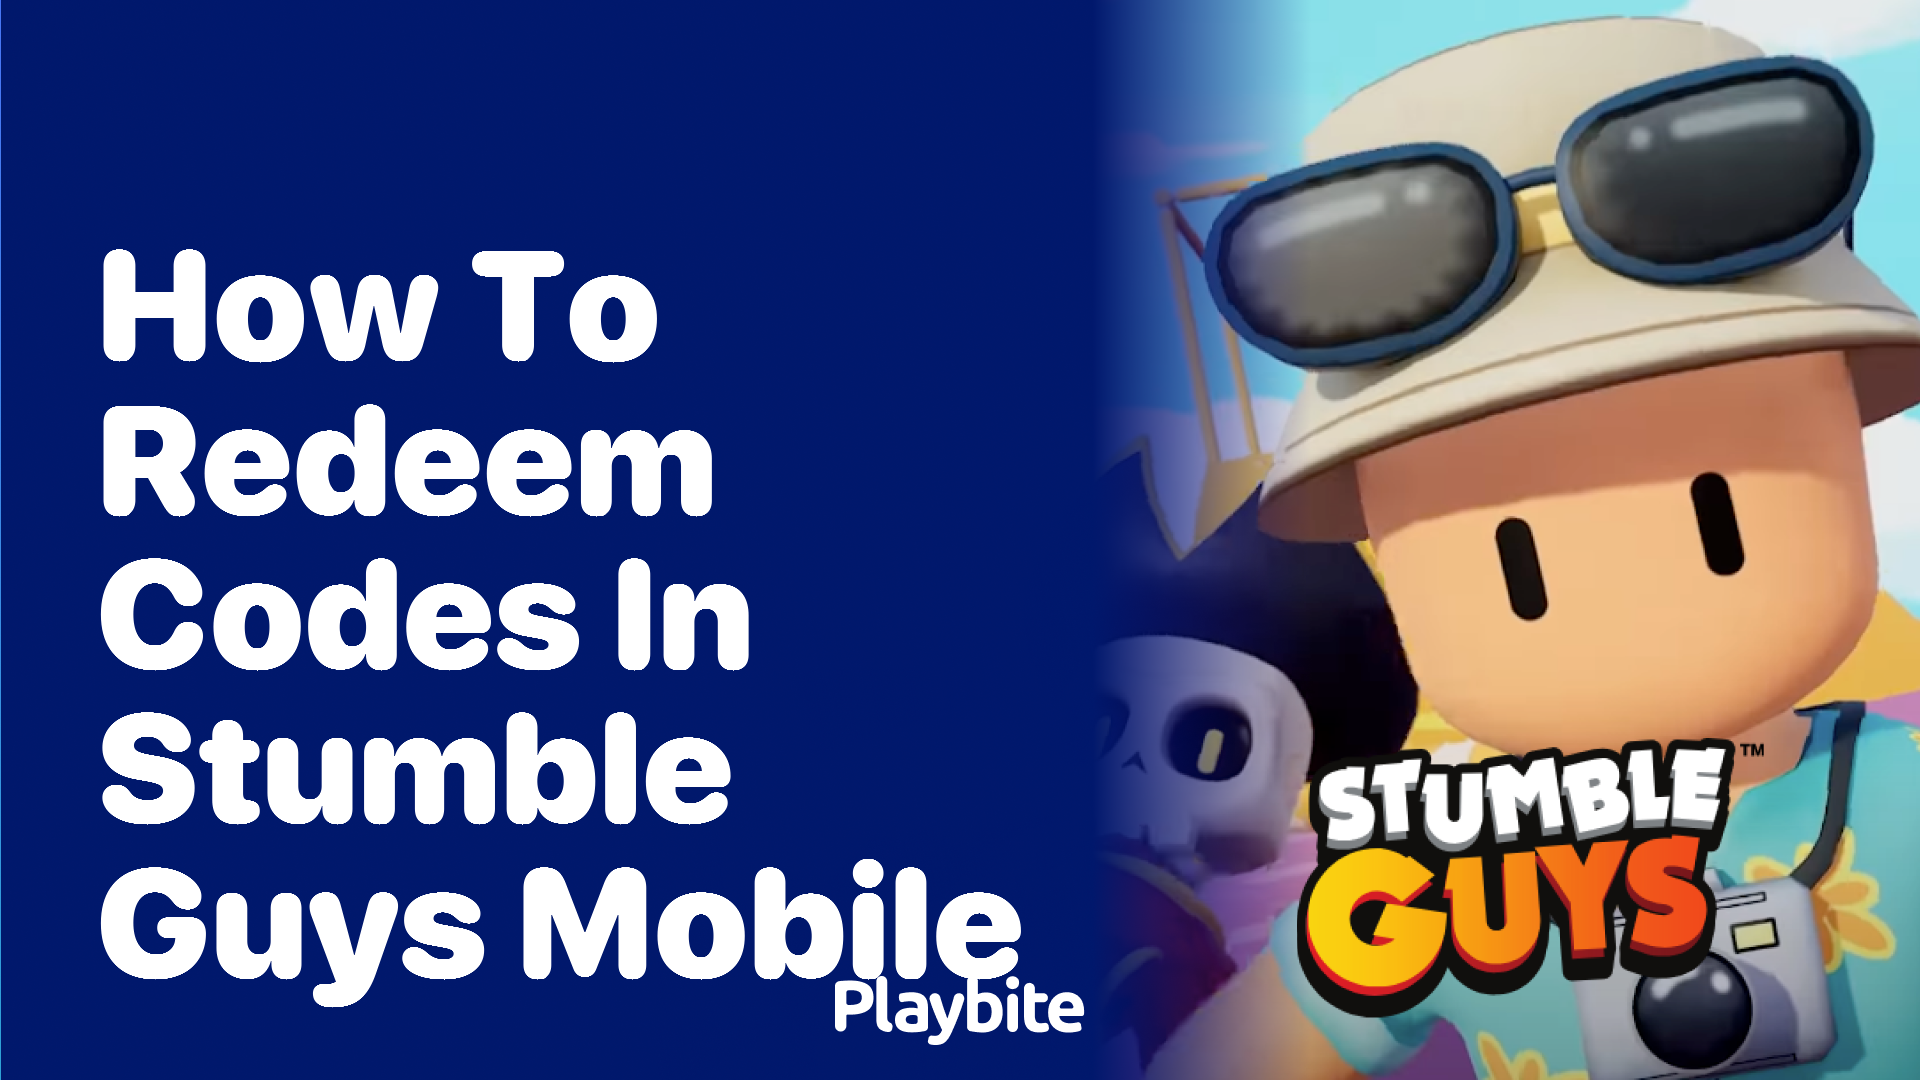 How to Redeem Codes in Stumble Guys Mobile